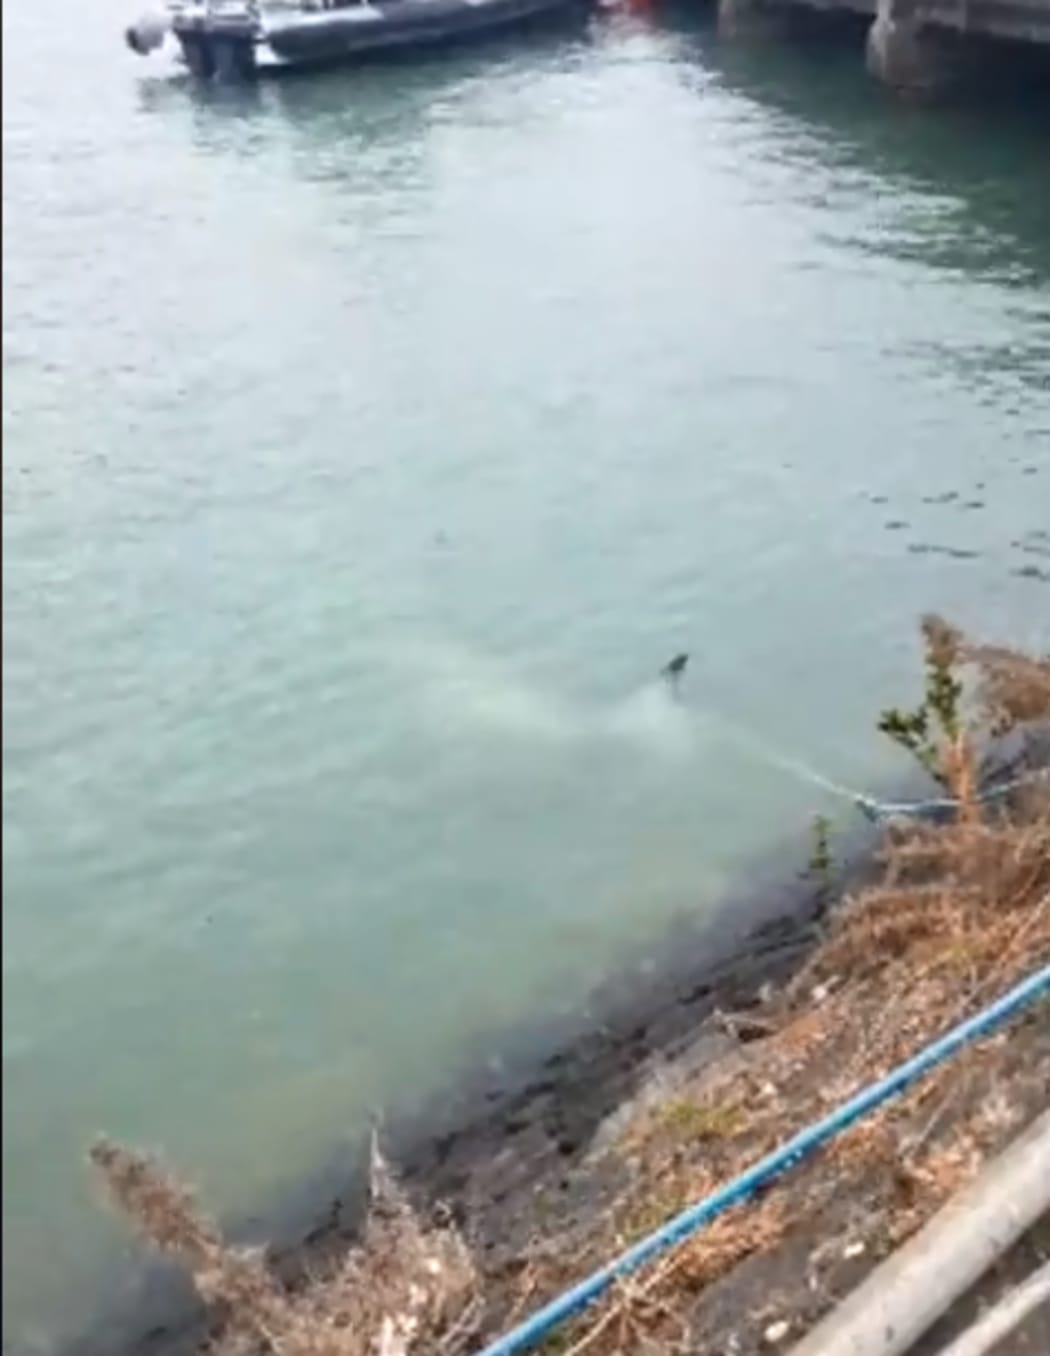 A juvenile minke whale was stuck under a wharf at Hobsonville Point.